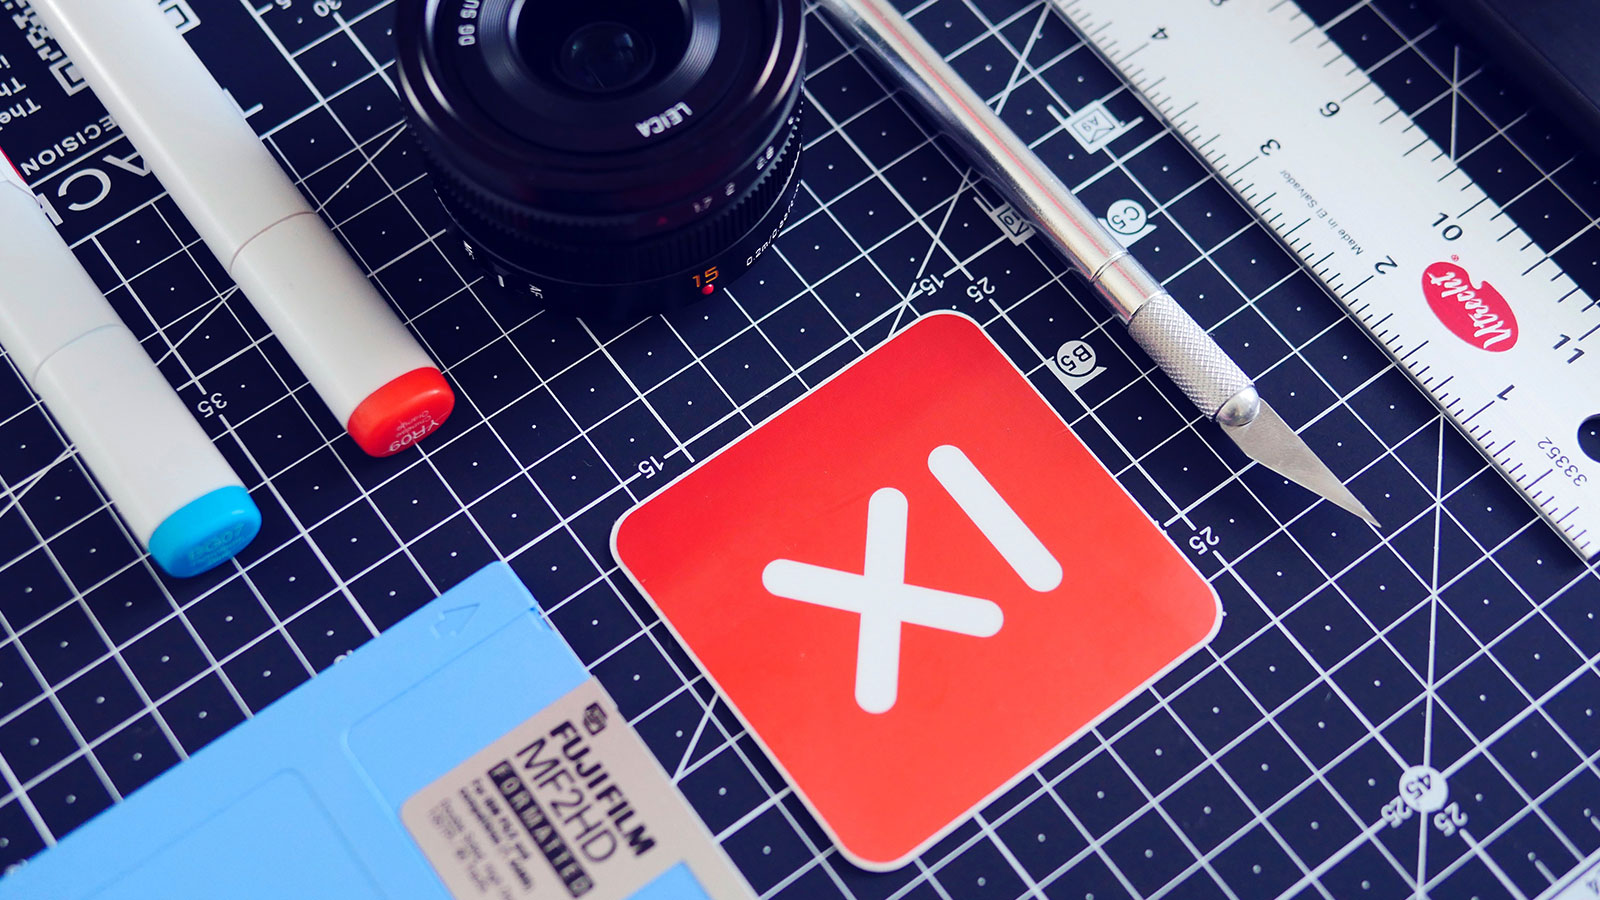 Markers, a ruler, and a camera lens on a desk